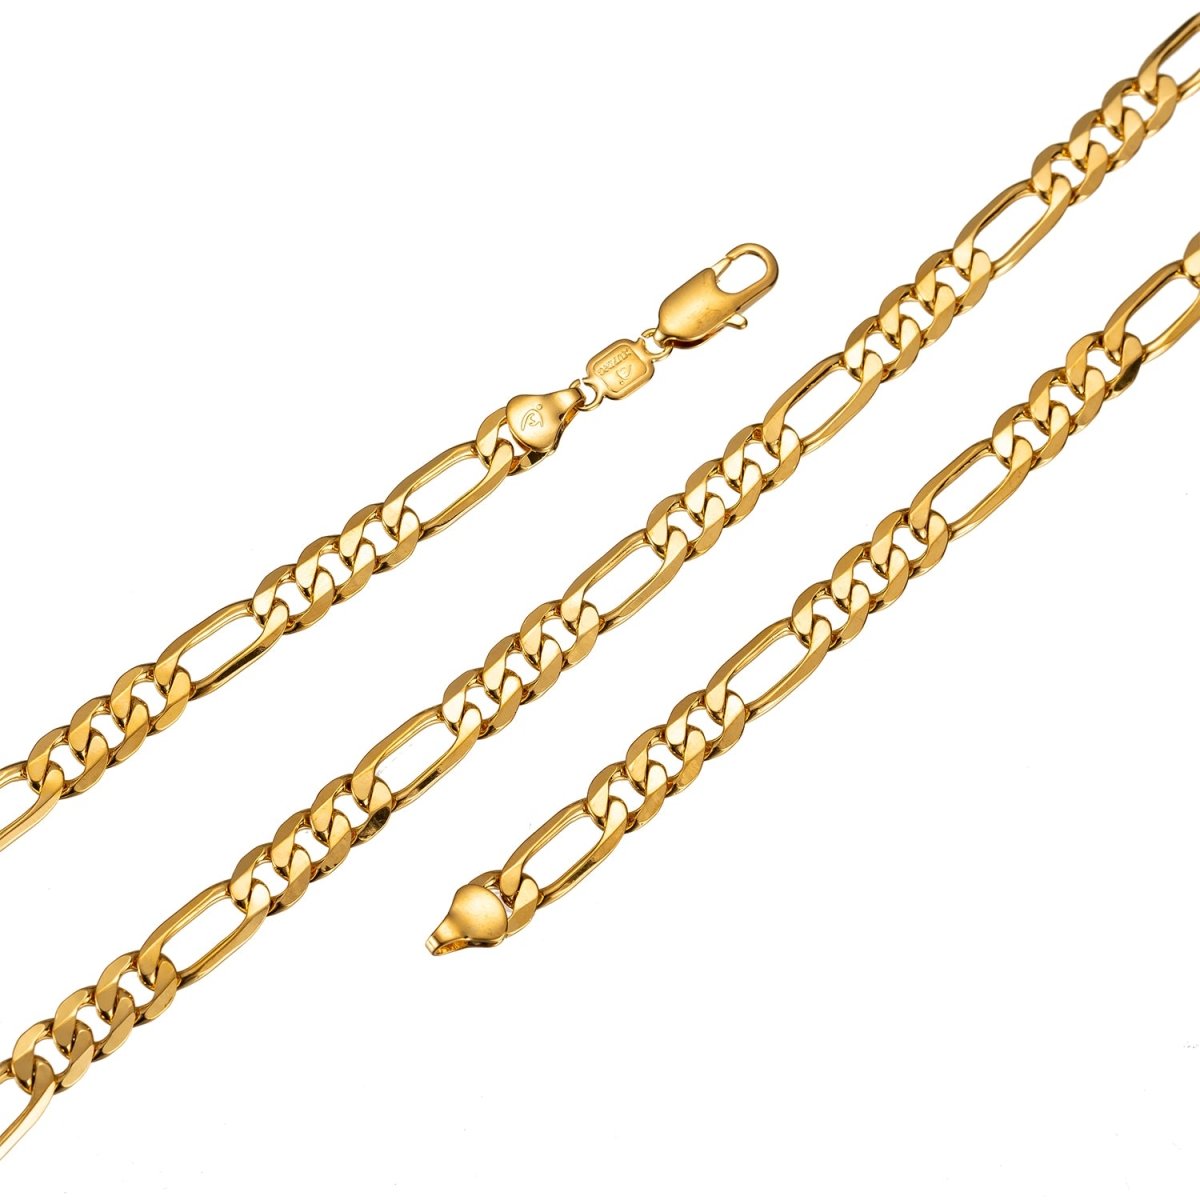 23.5 inch Figaro Chain Necklace, 24K Gold Plated Finished Figaro Chain Necklace, 4mm Width Figaro Necklace w/ Lobster Clasps | CN-423 Clearance Pricing - DLUXCA